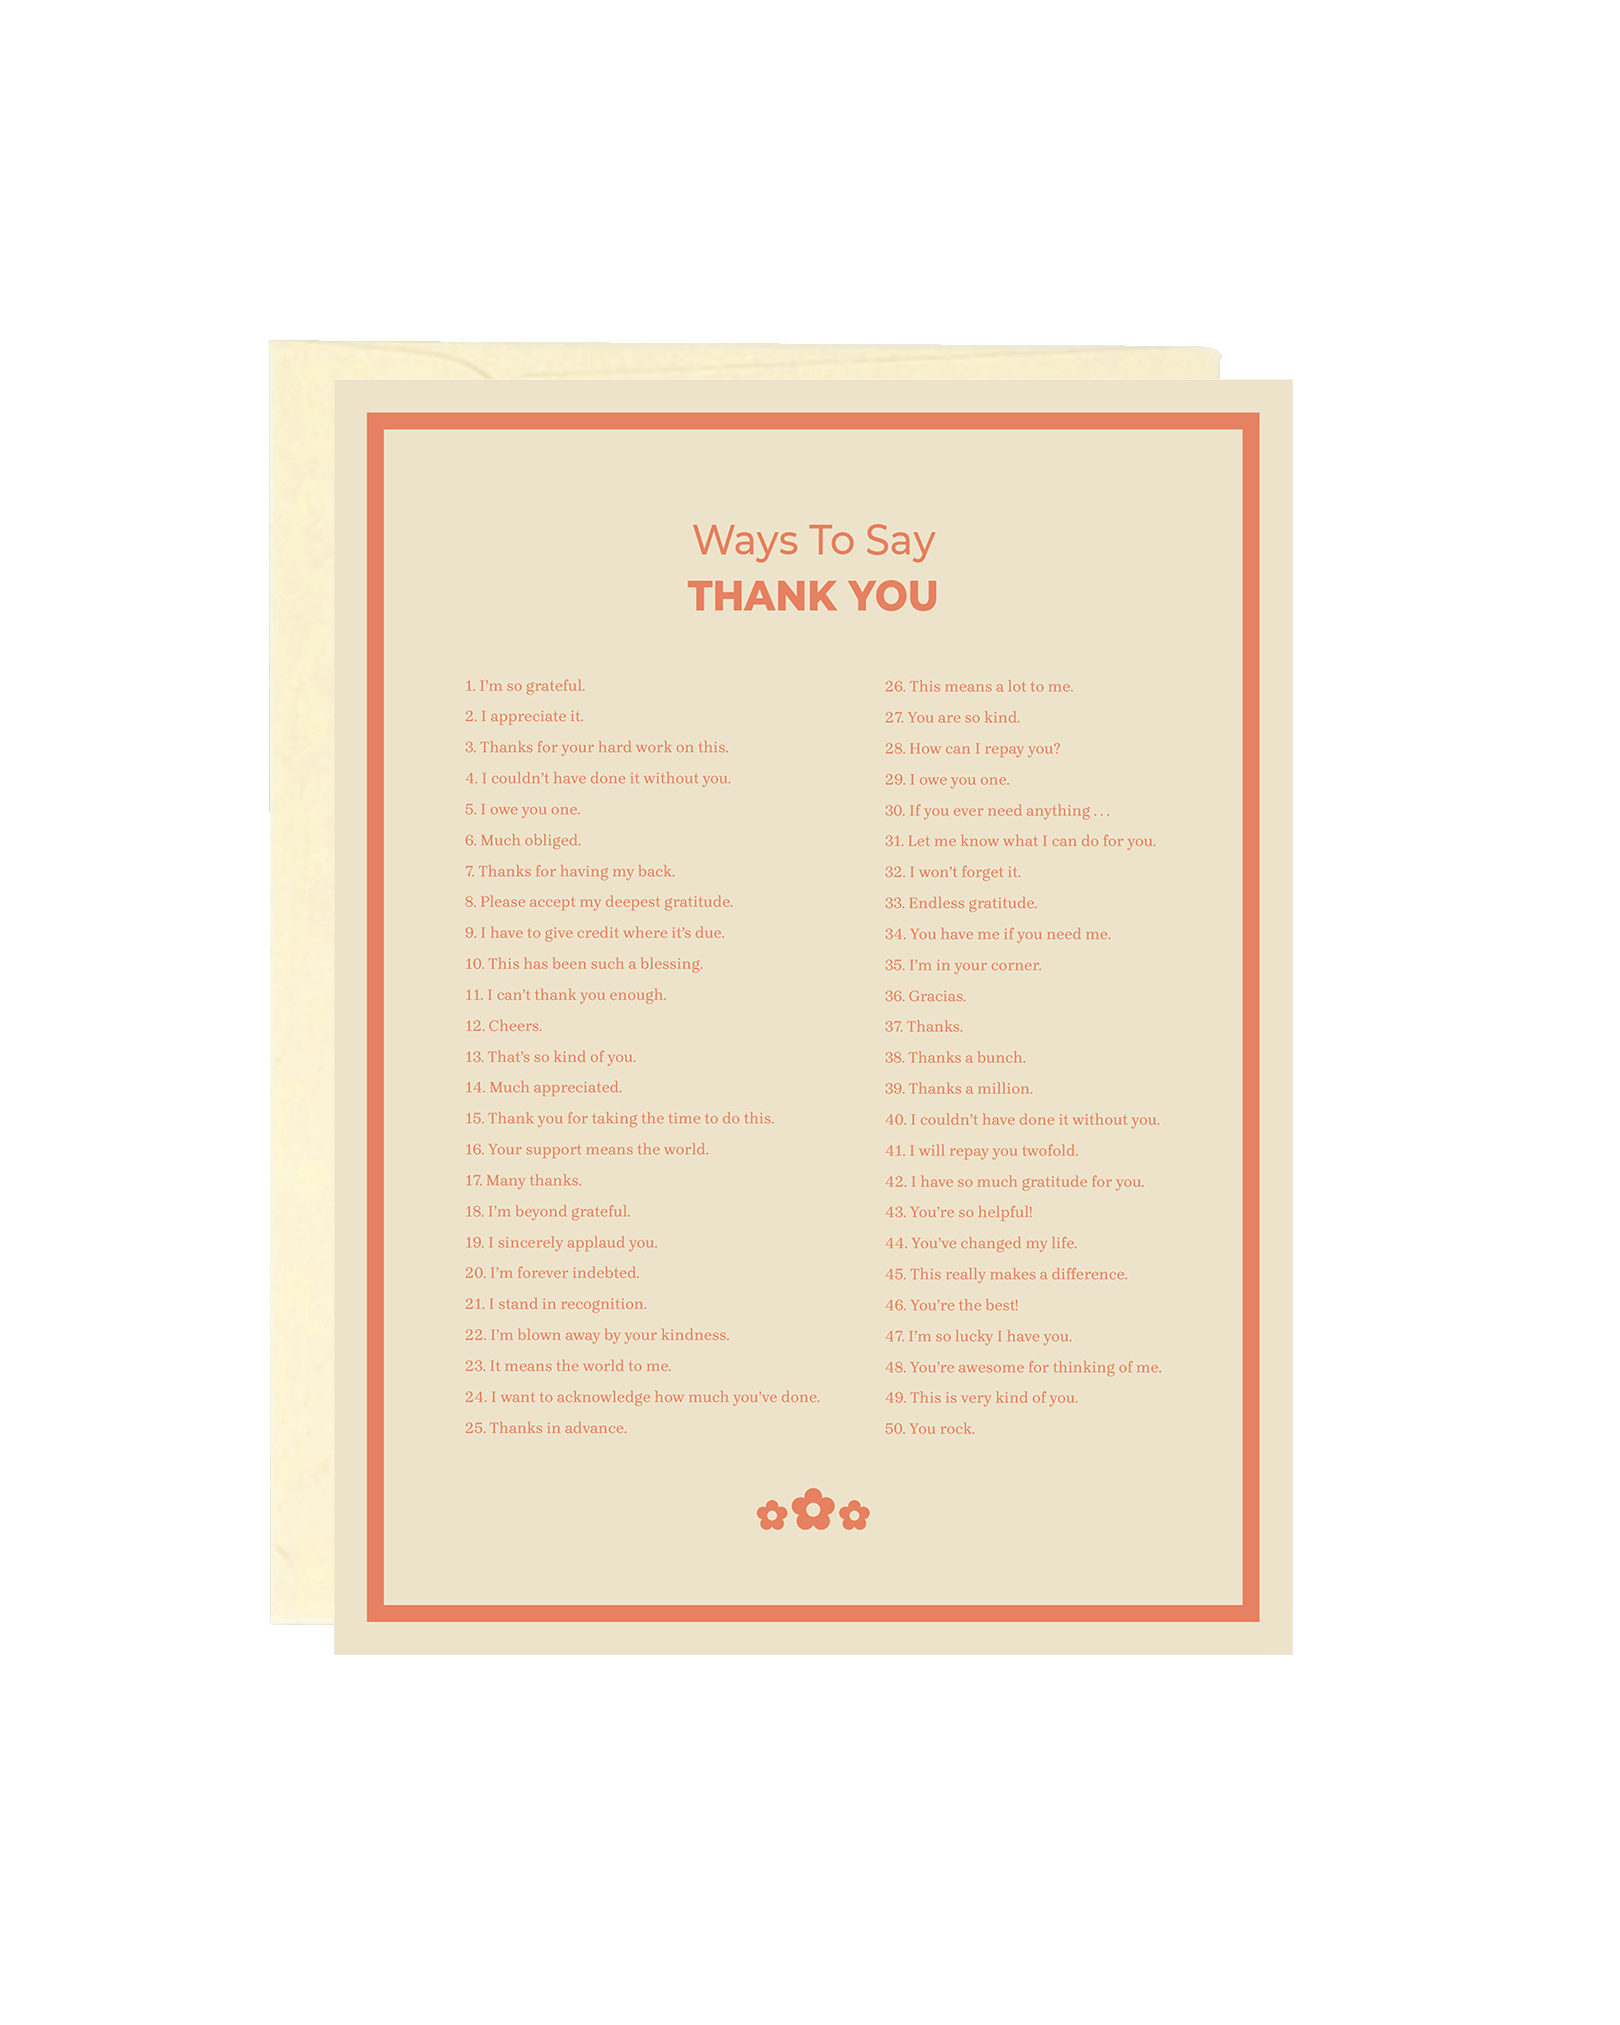 THANK YOU CARD - Ways To Say Thank You